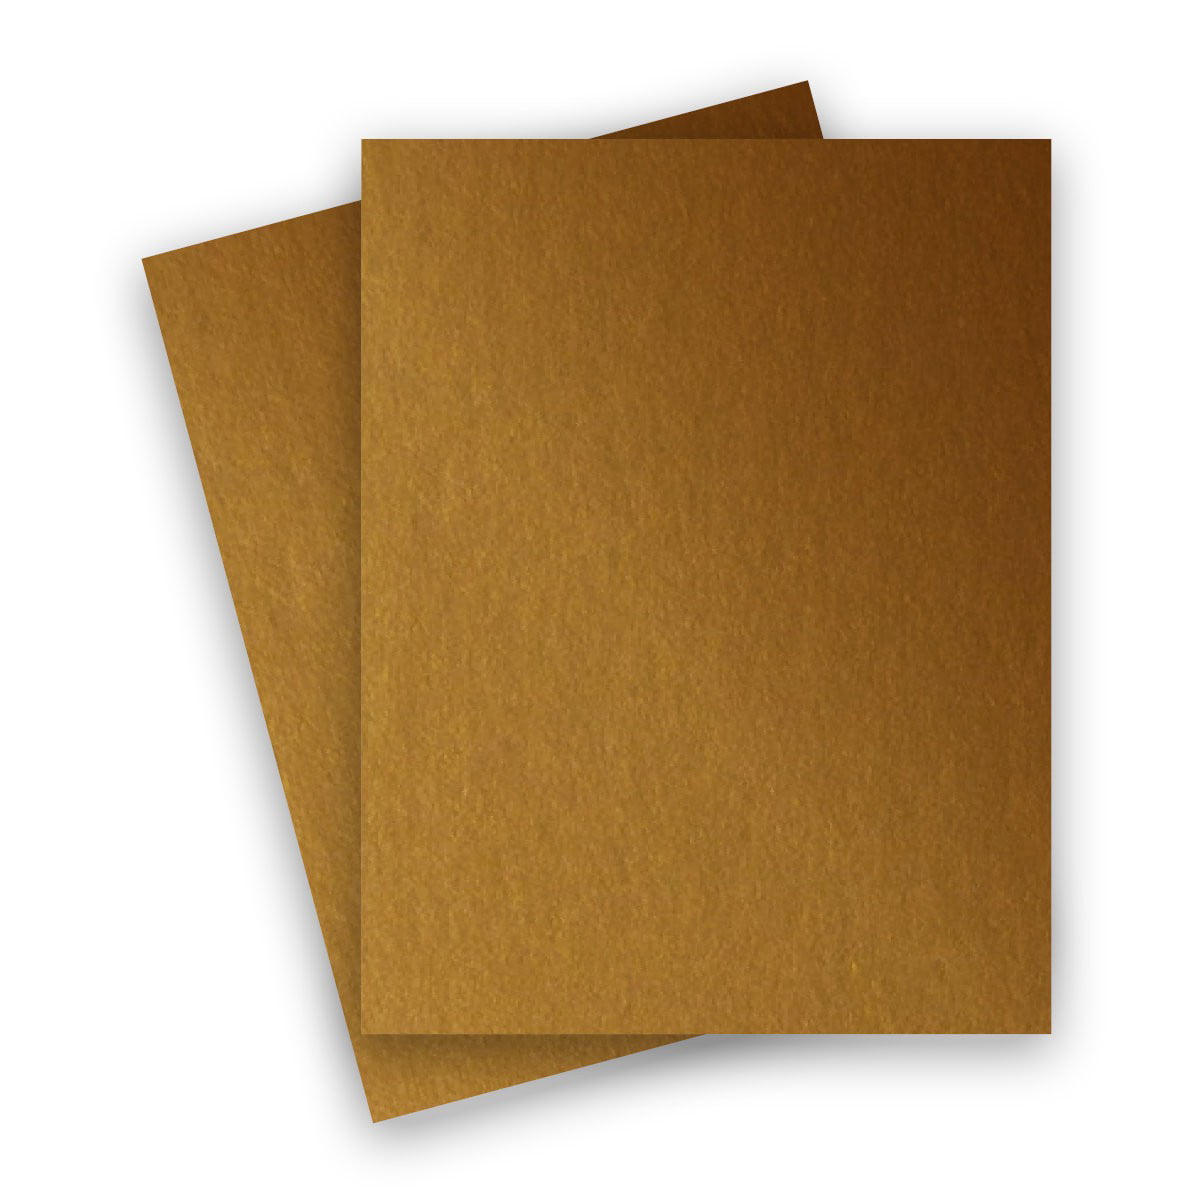 Antique Gold,25-PK PaperPapers Metallic 8.5X11 Letter Size 32T Specialty Paper Lightweight foldable multi-use